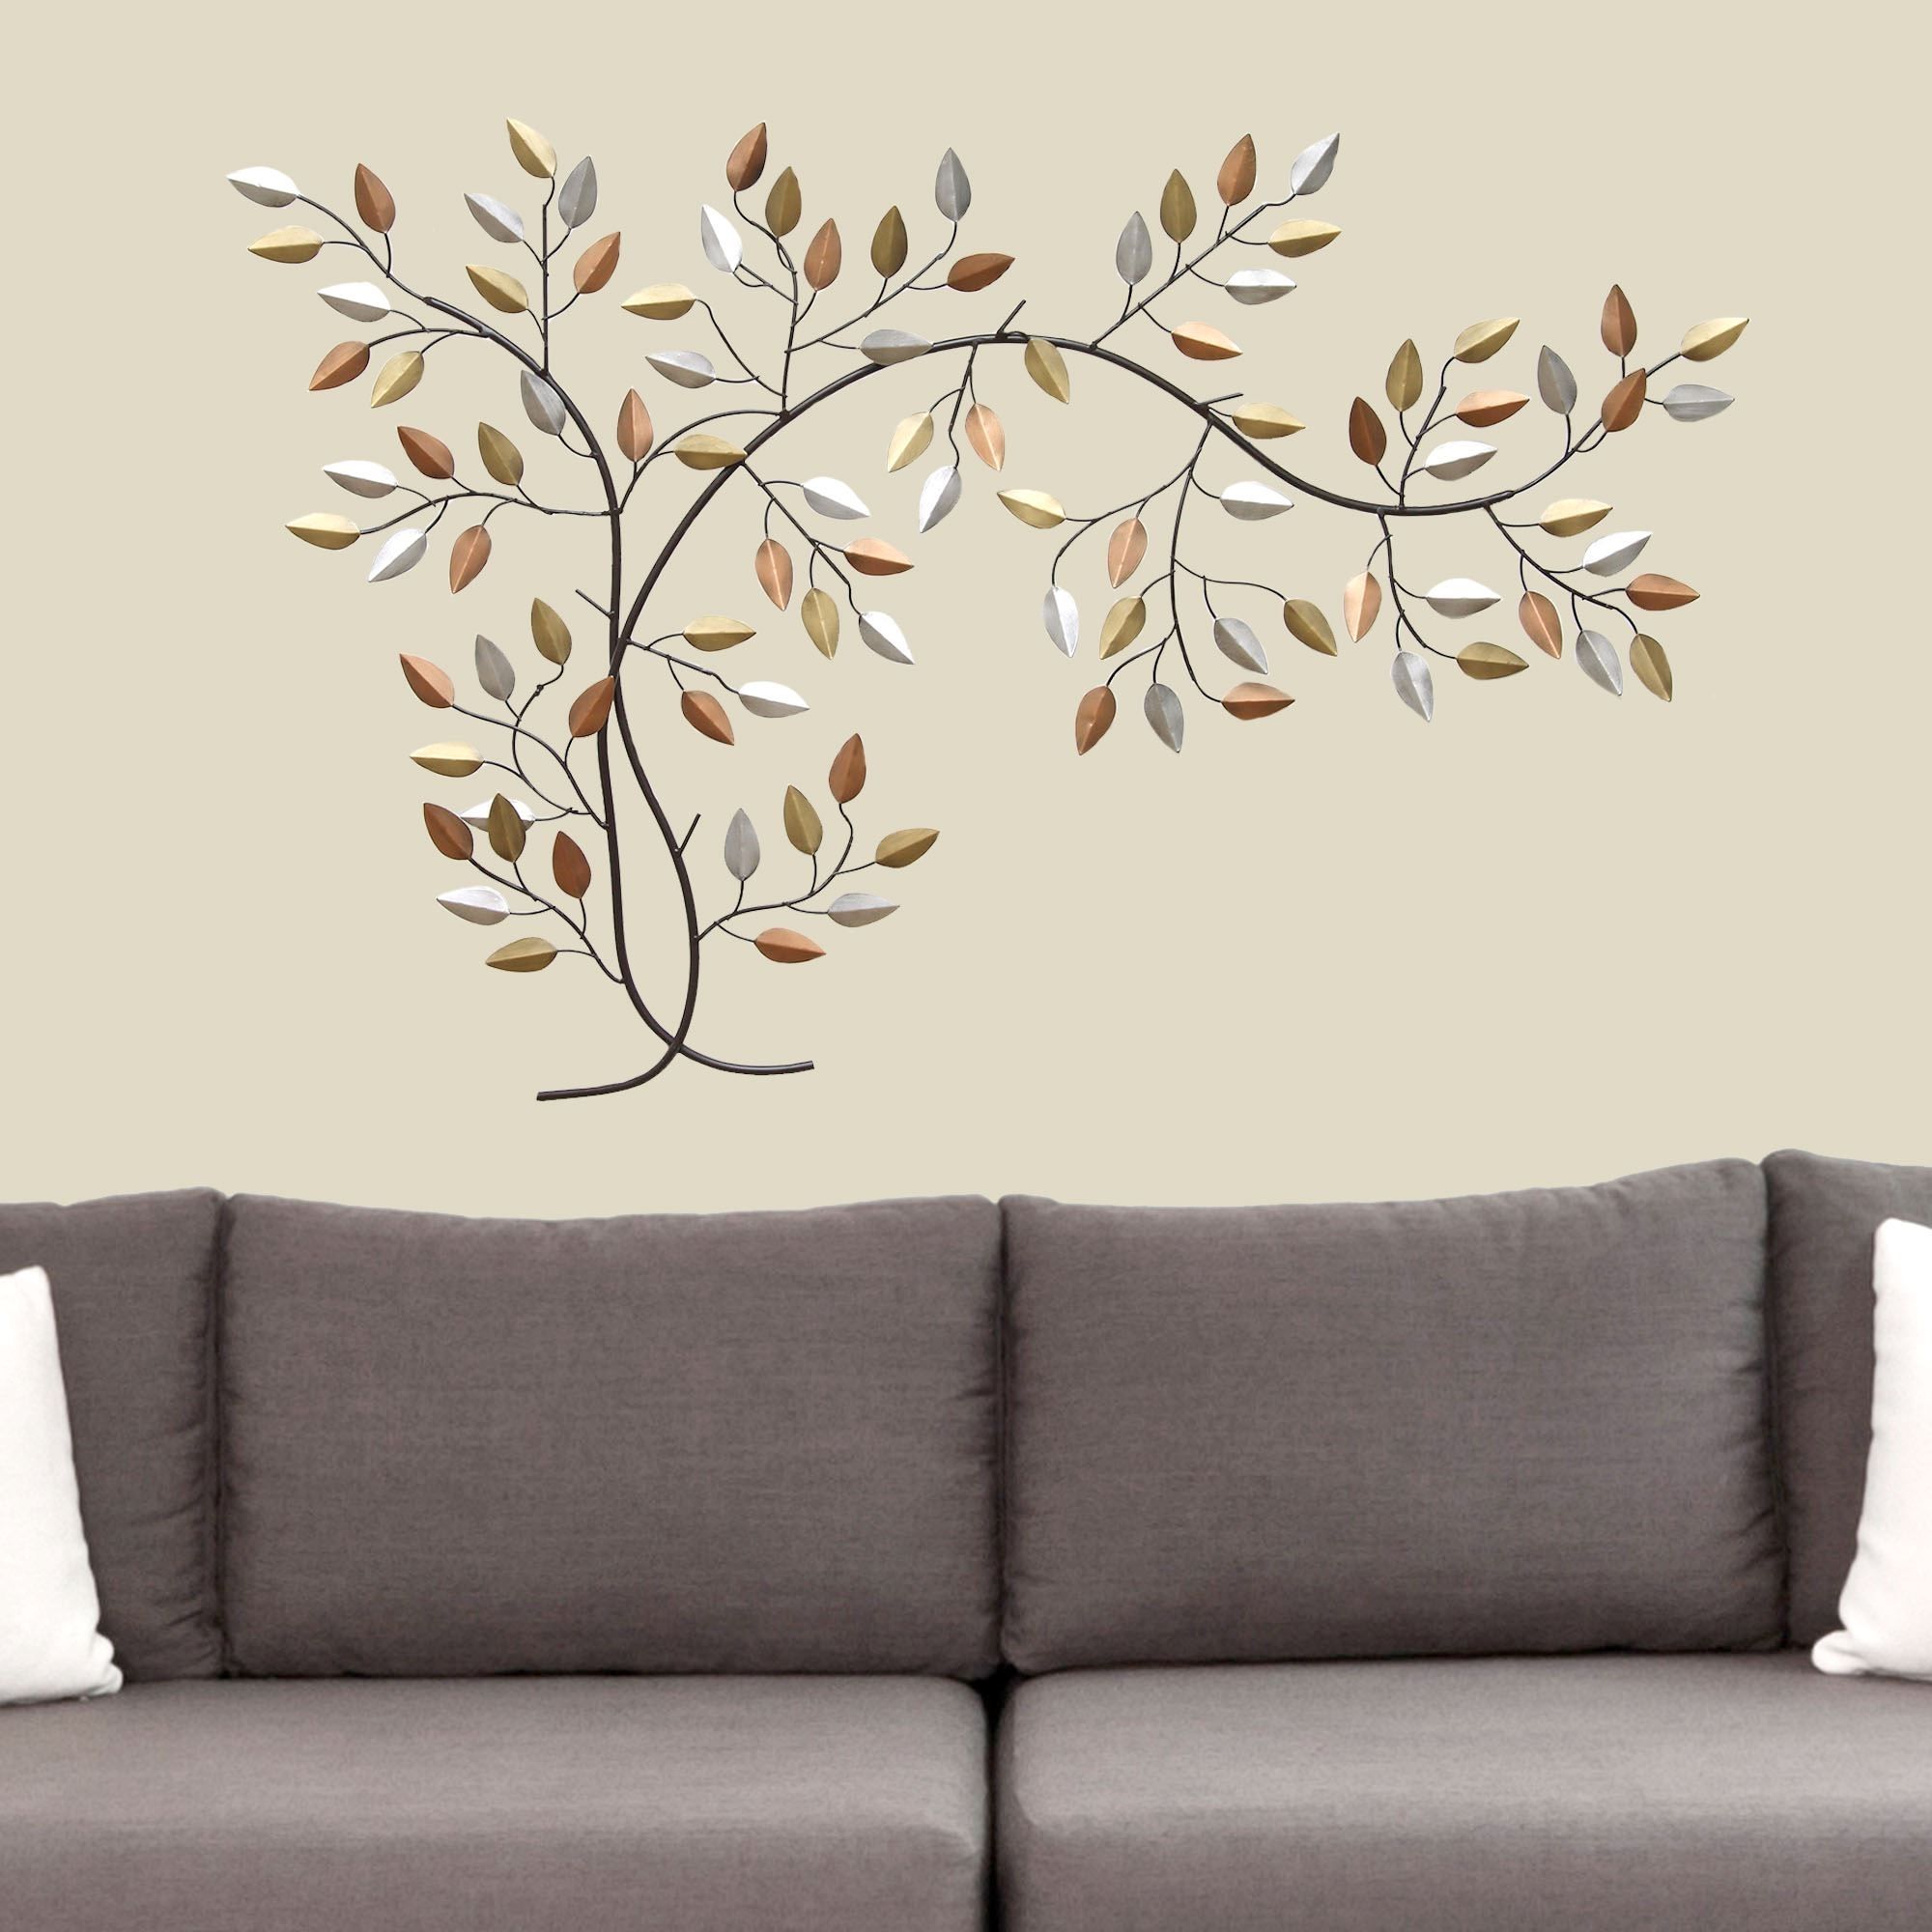 Metallic Wall Art Intended For Recent Leaf Branch Metal Wall Art (View 11 of 15)